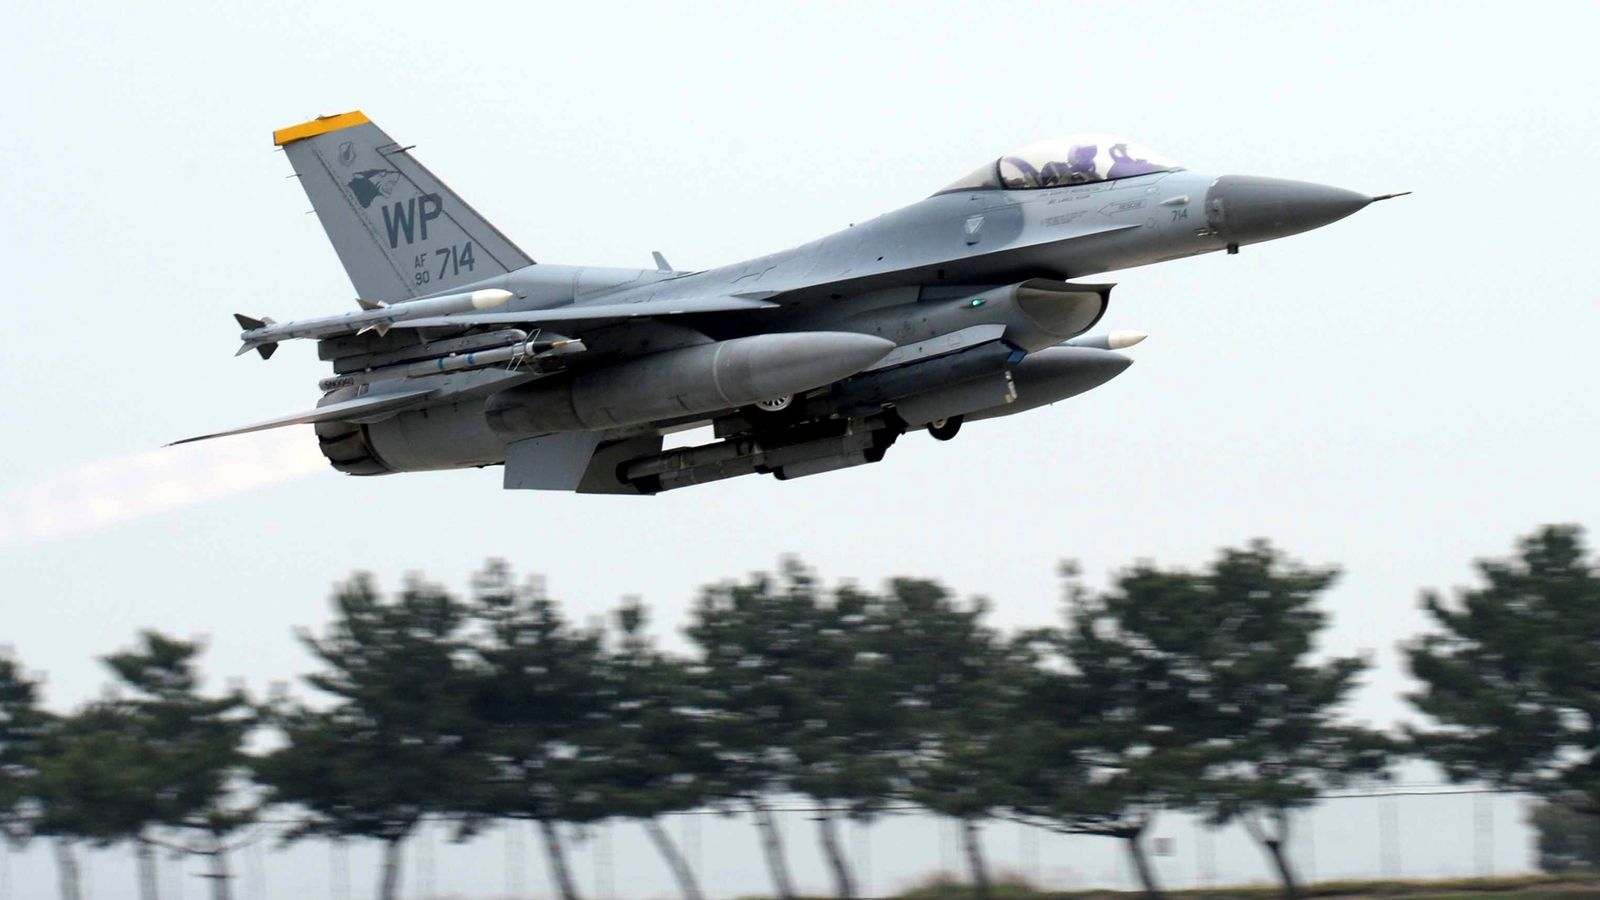 US pilot safely ejects before fighter jet crashes into sea off South Korea, officials say